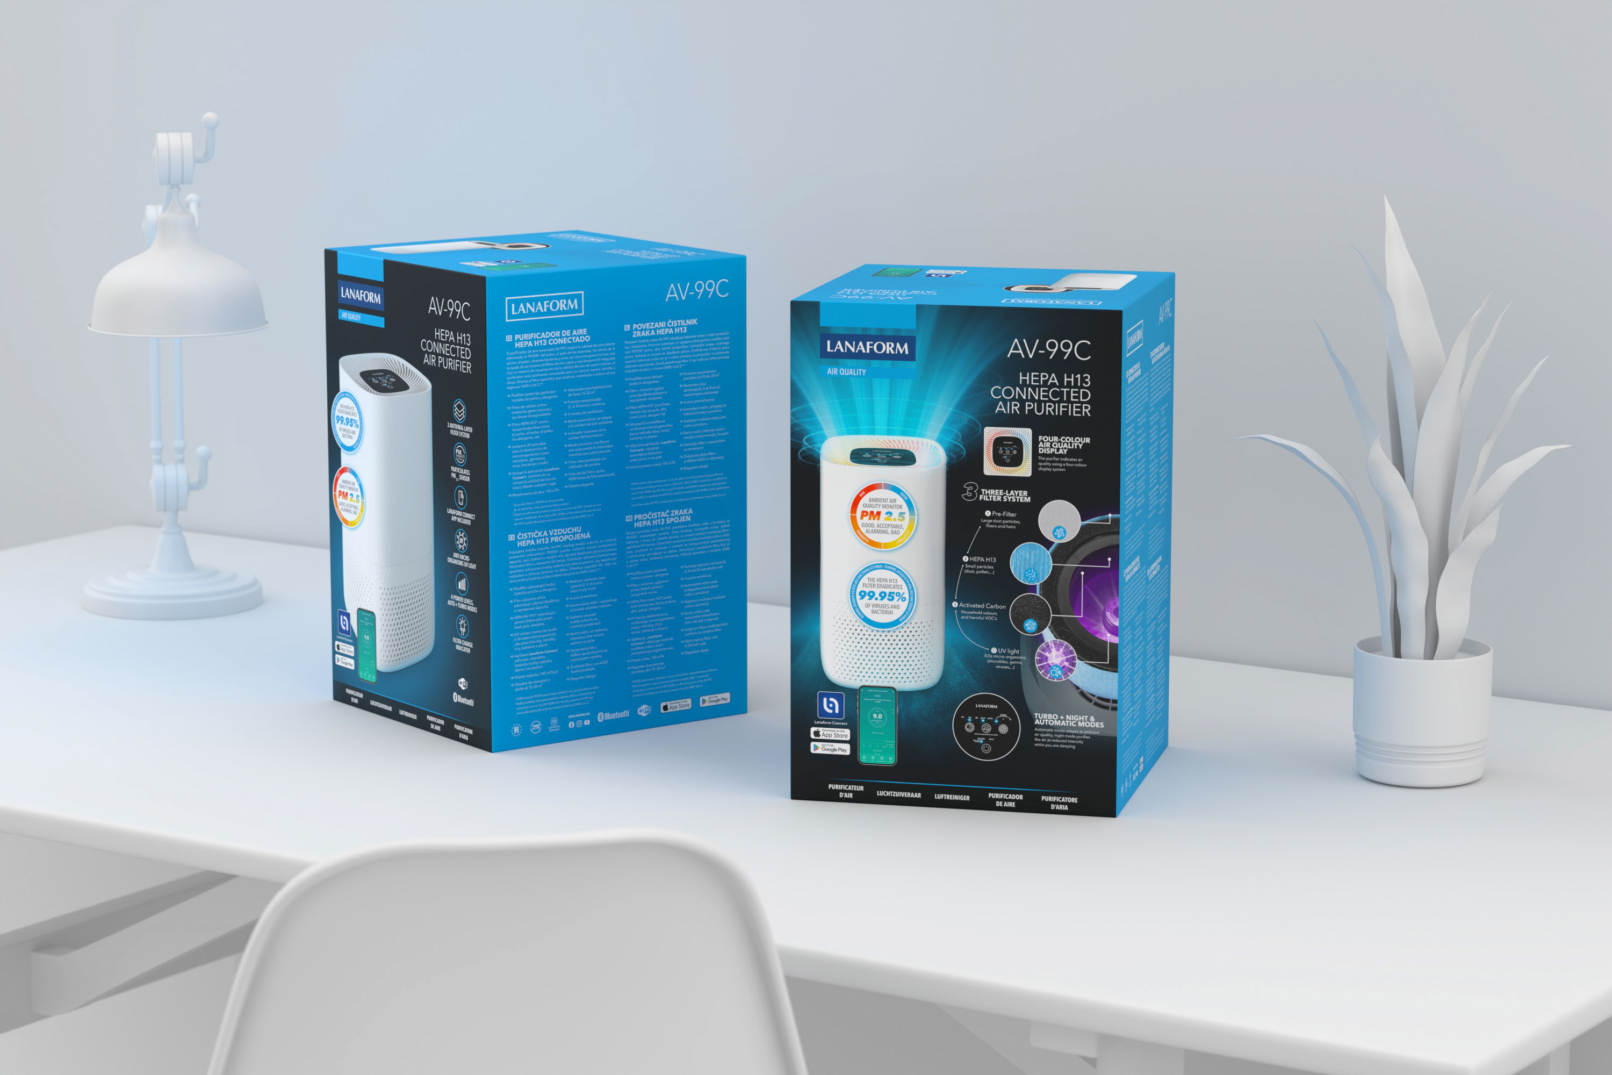 Two blue packagings of the AV-99C Air Purifier on a table, next to a lamp and a plant